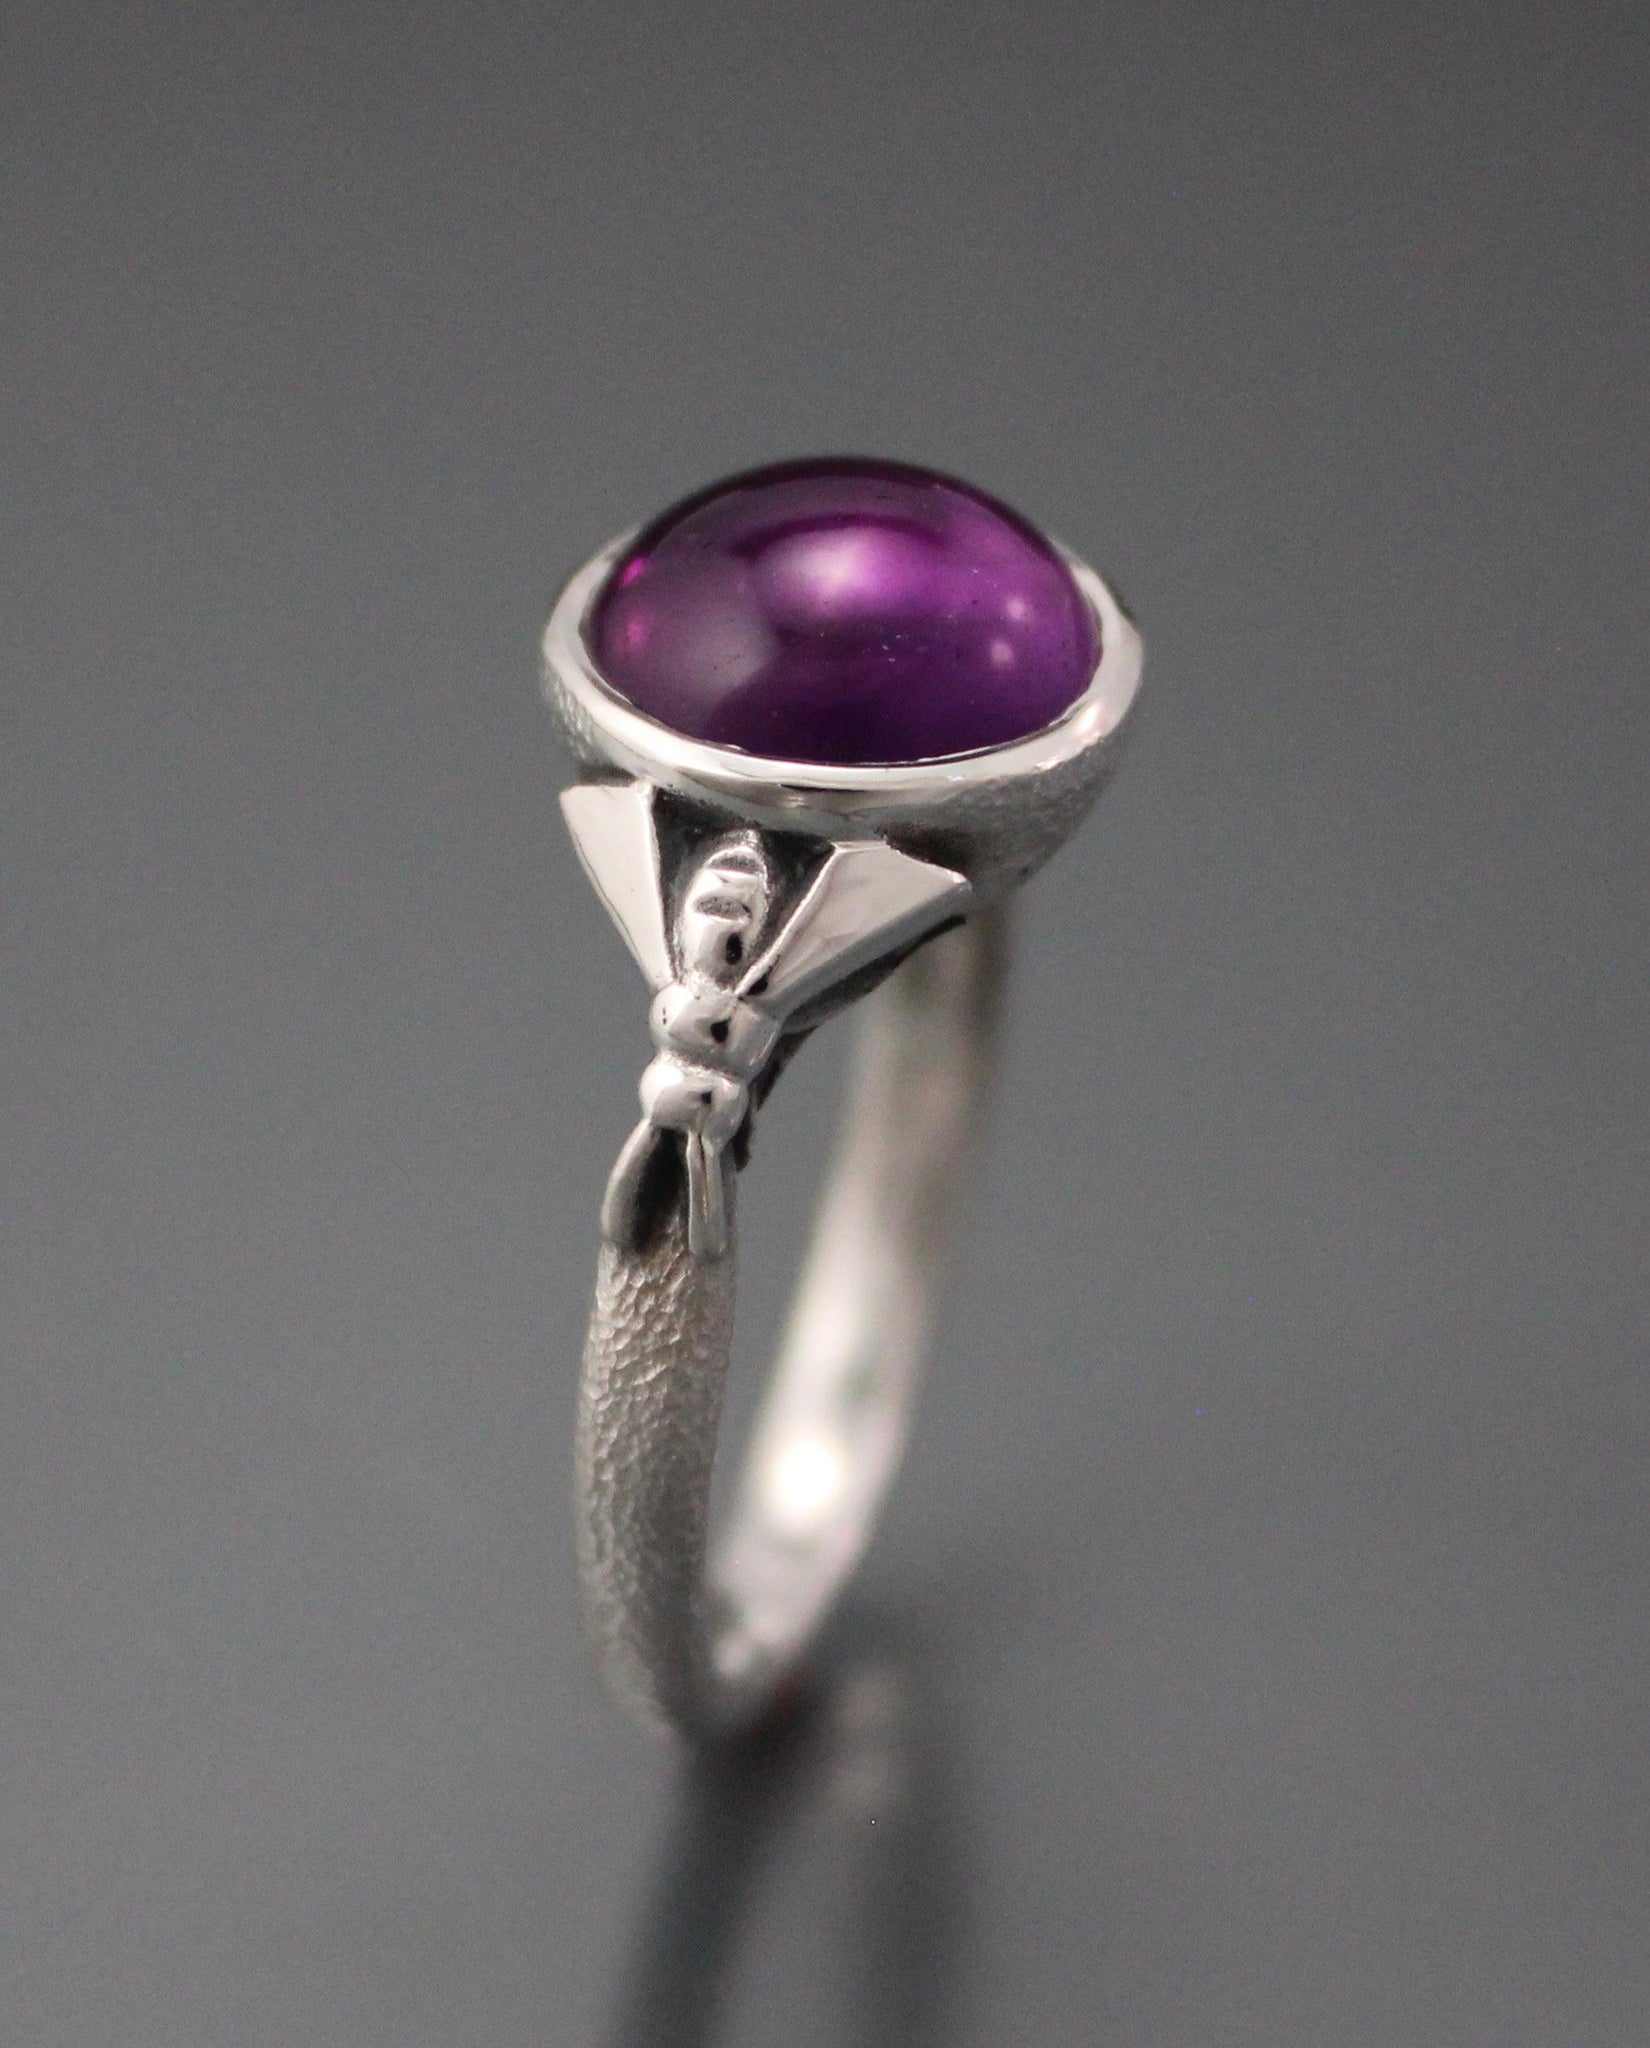 silver honey bee ring with amethyst cab